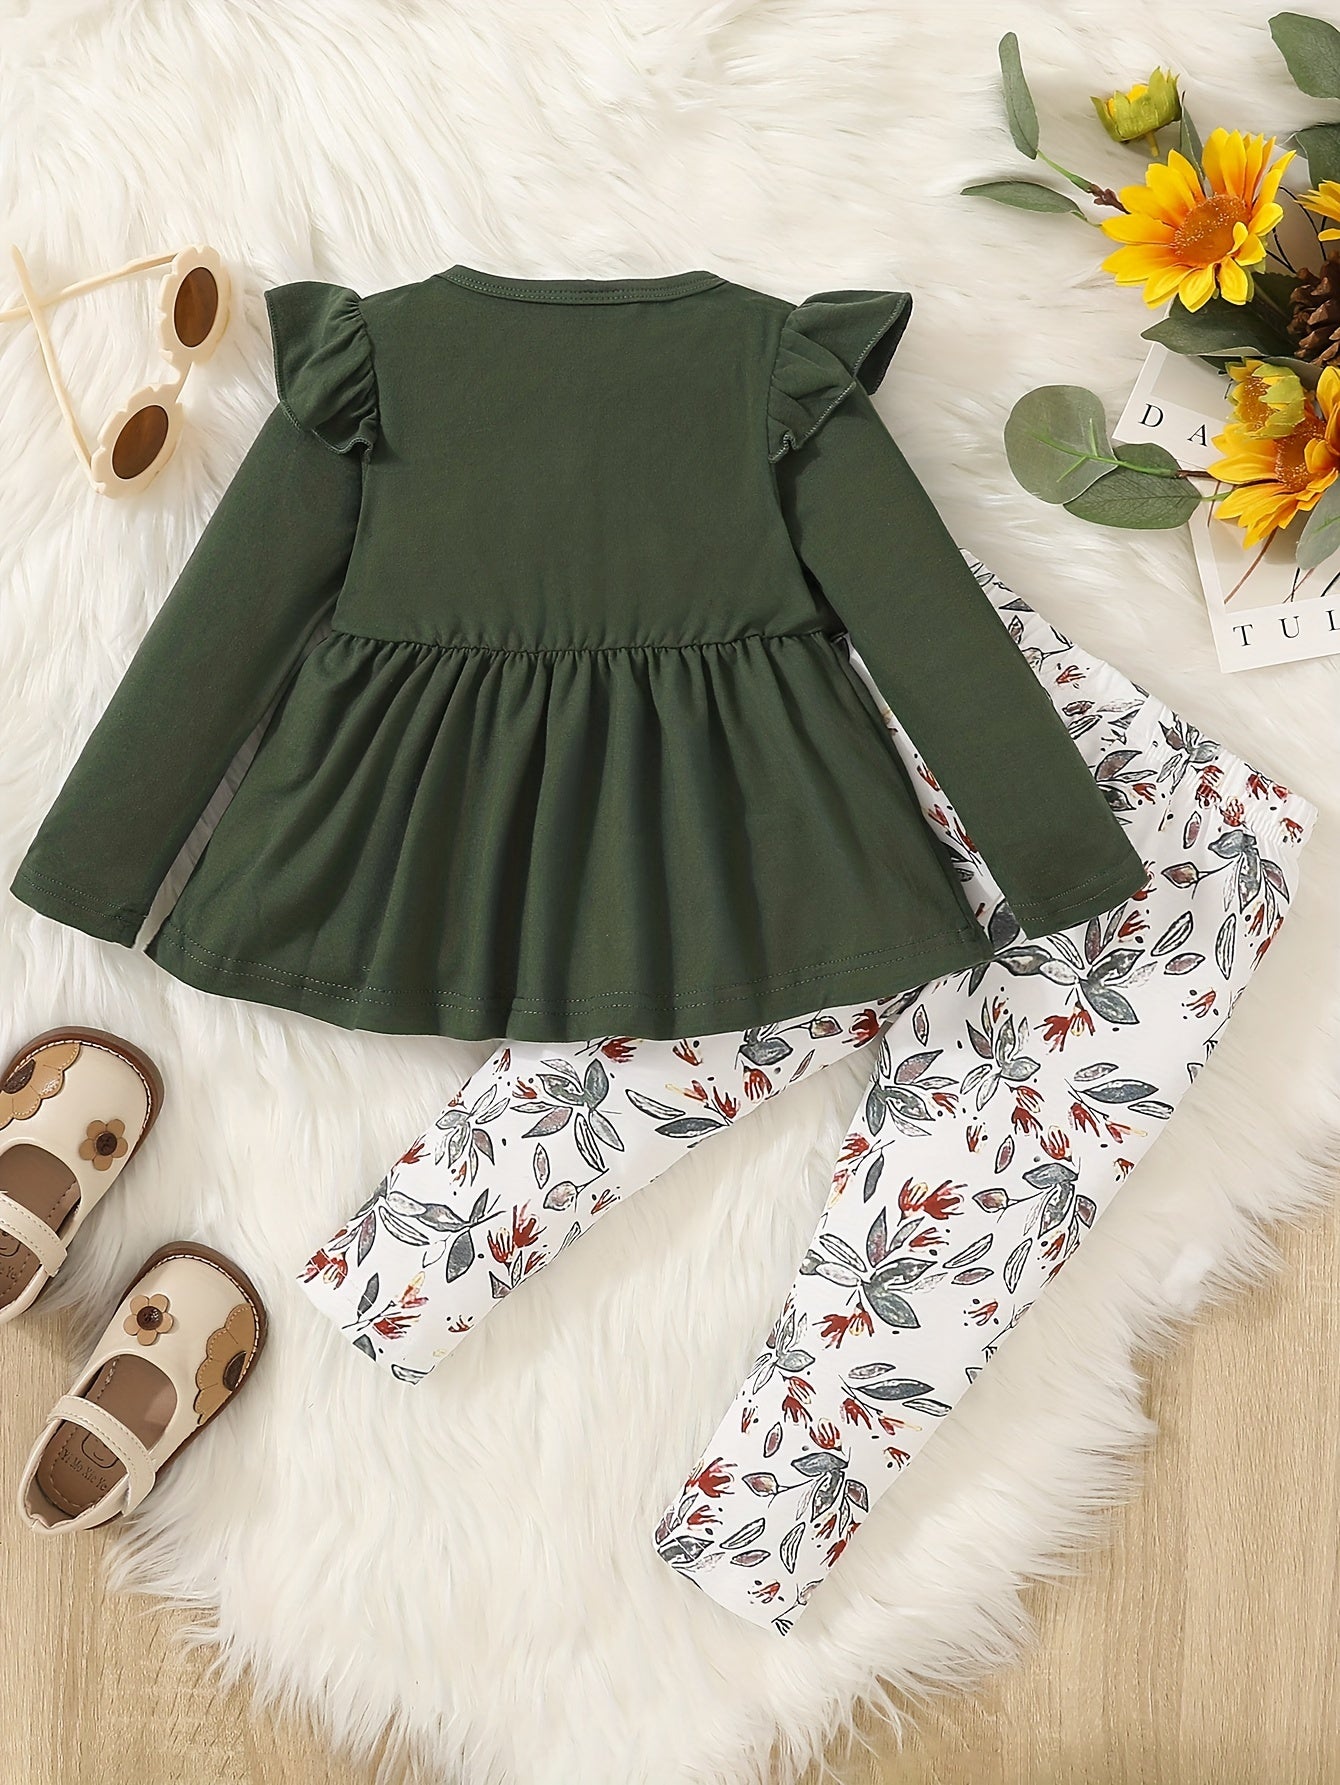 Baby Girl Baby Autumn Winter Outwear Outfit, Flutter Sleeve Splicing Bowknot Skirt Top &  Leaf Print Pants Set,